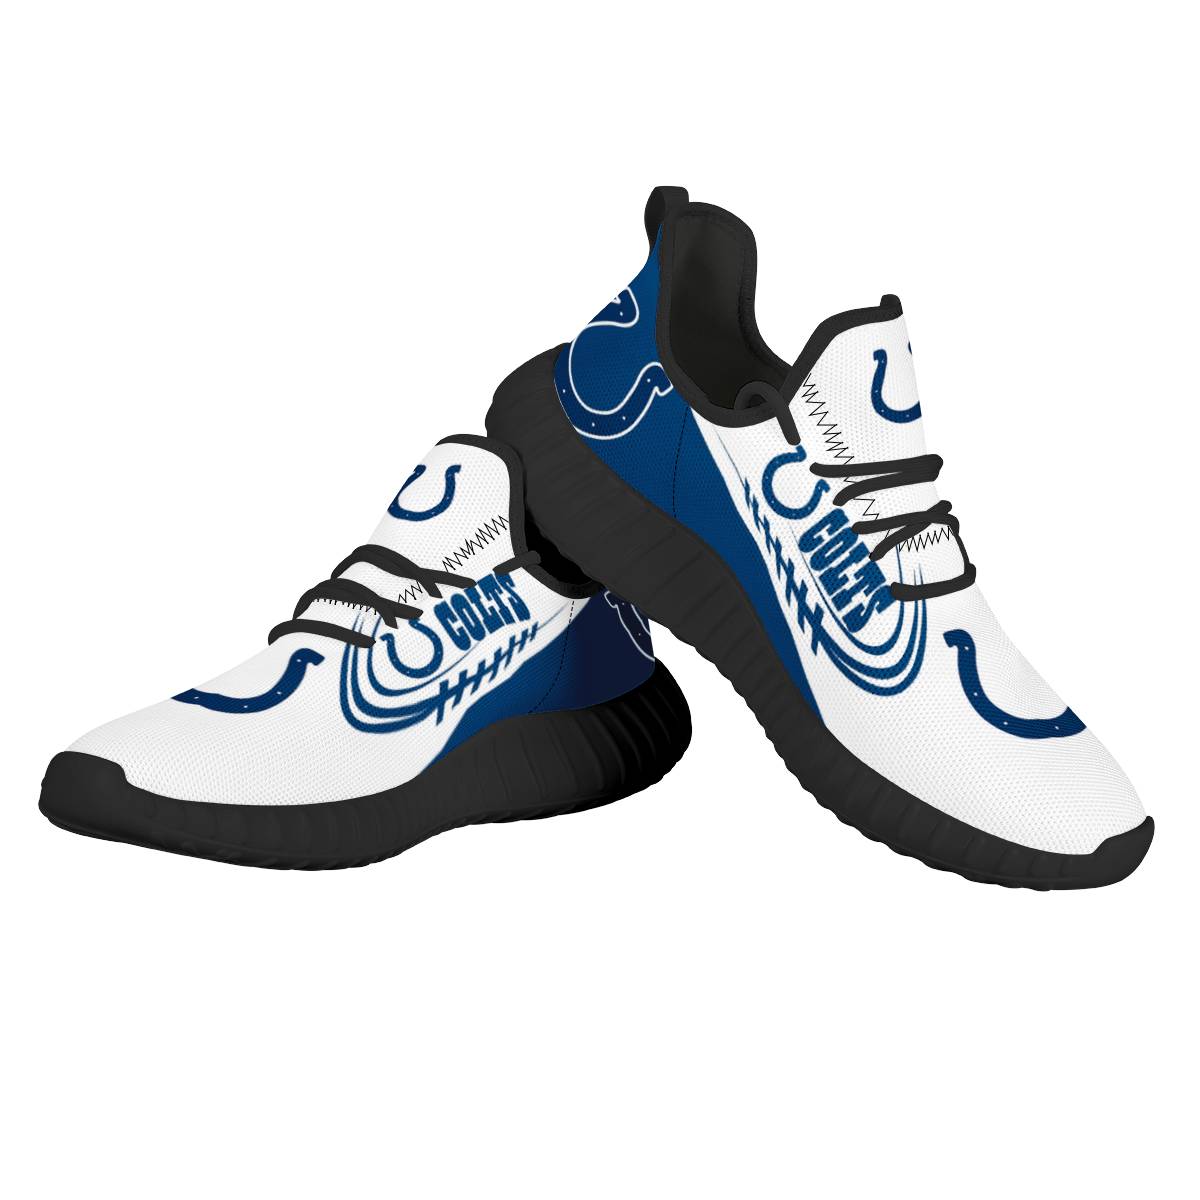 Men's NFL Indianapolis Colts Mesh Knit Sneakers/Shoes 001